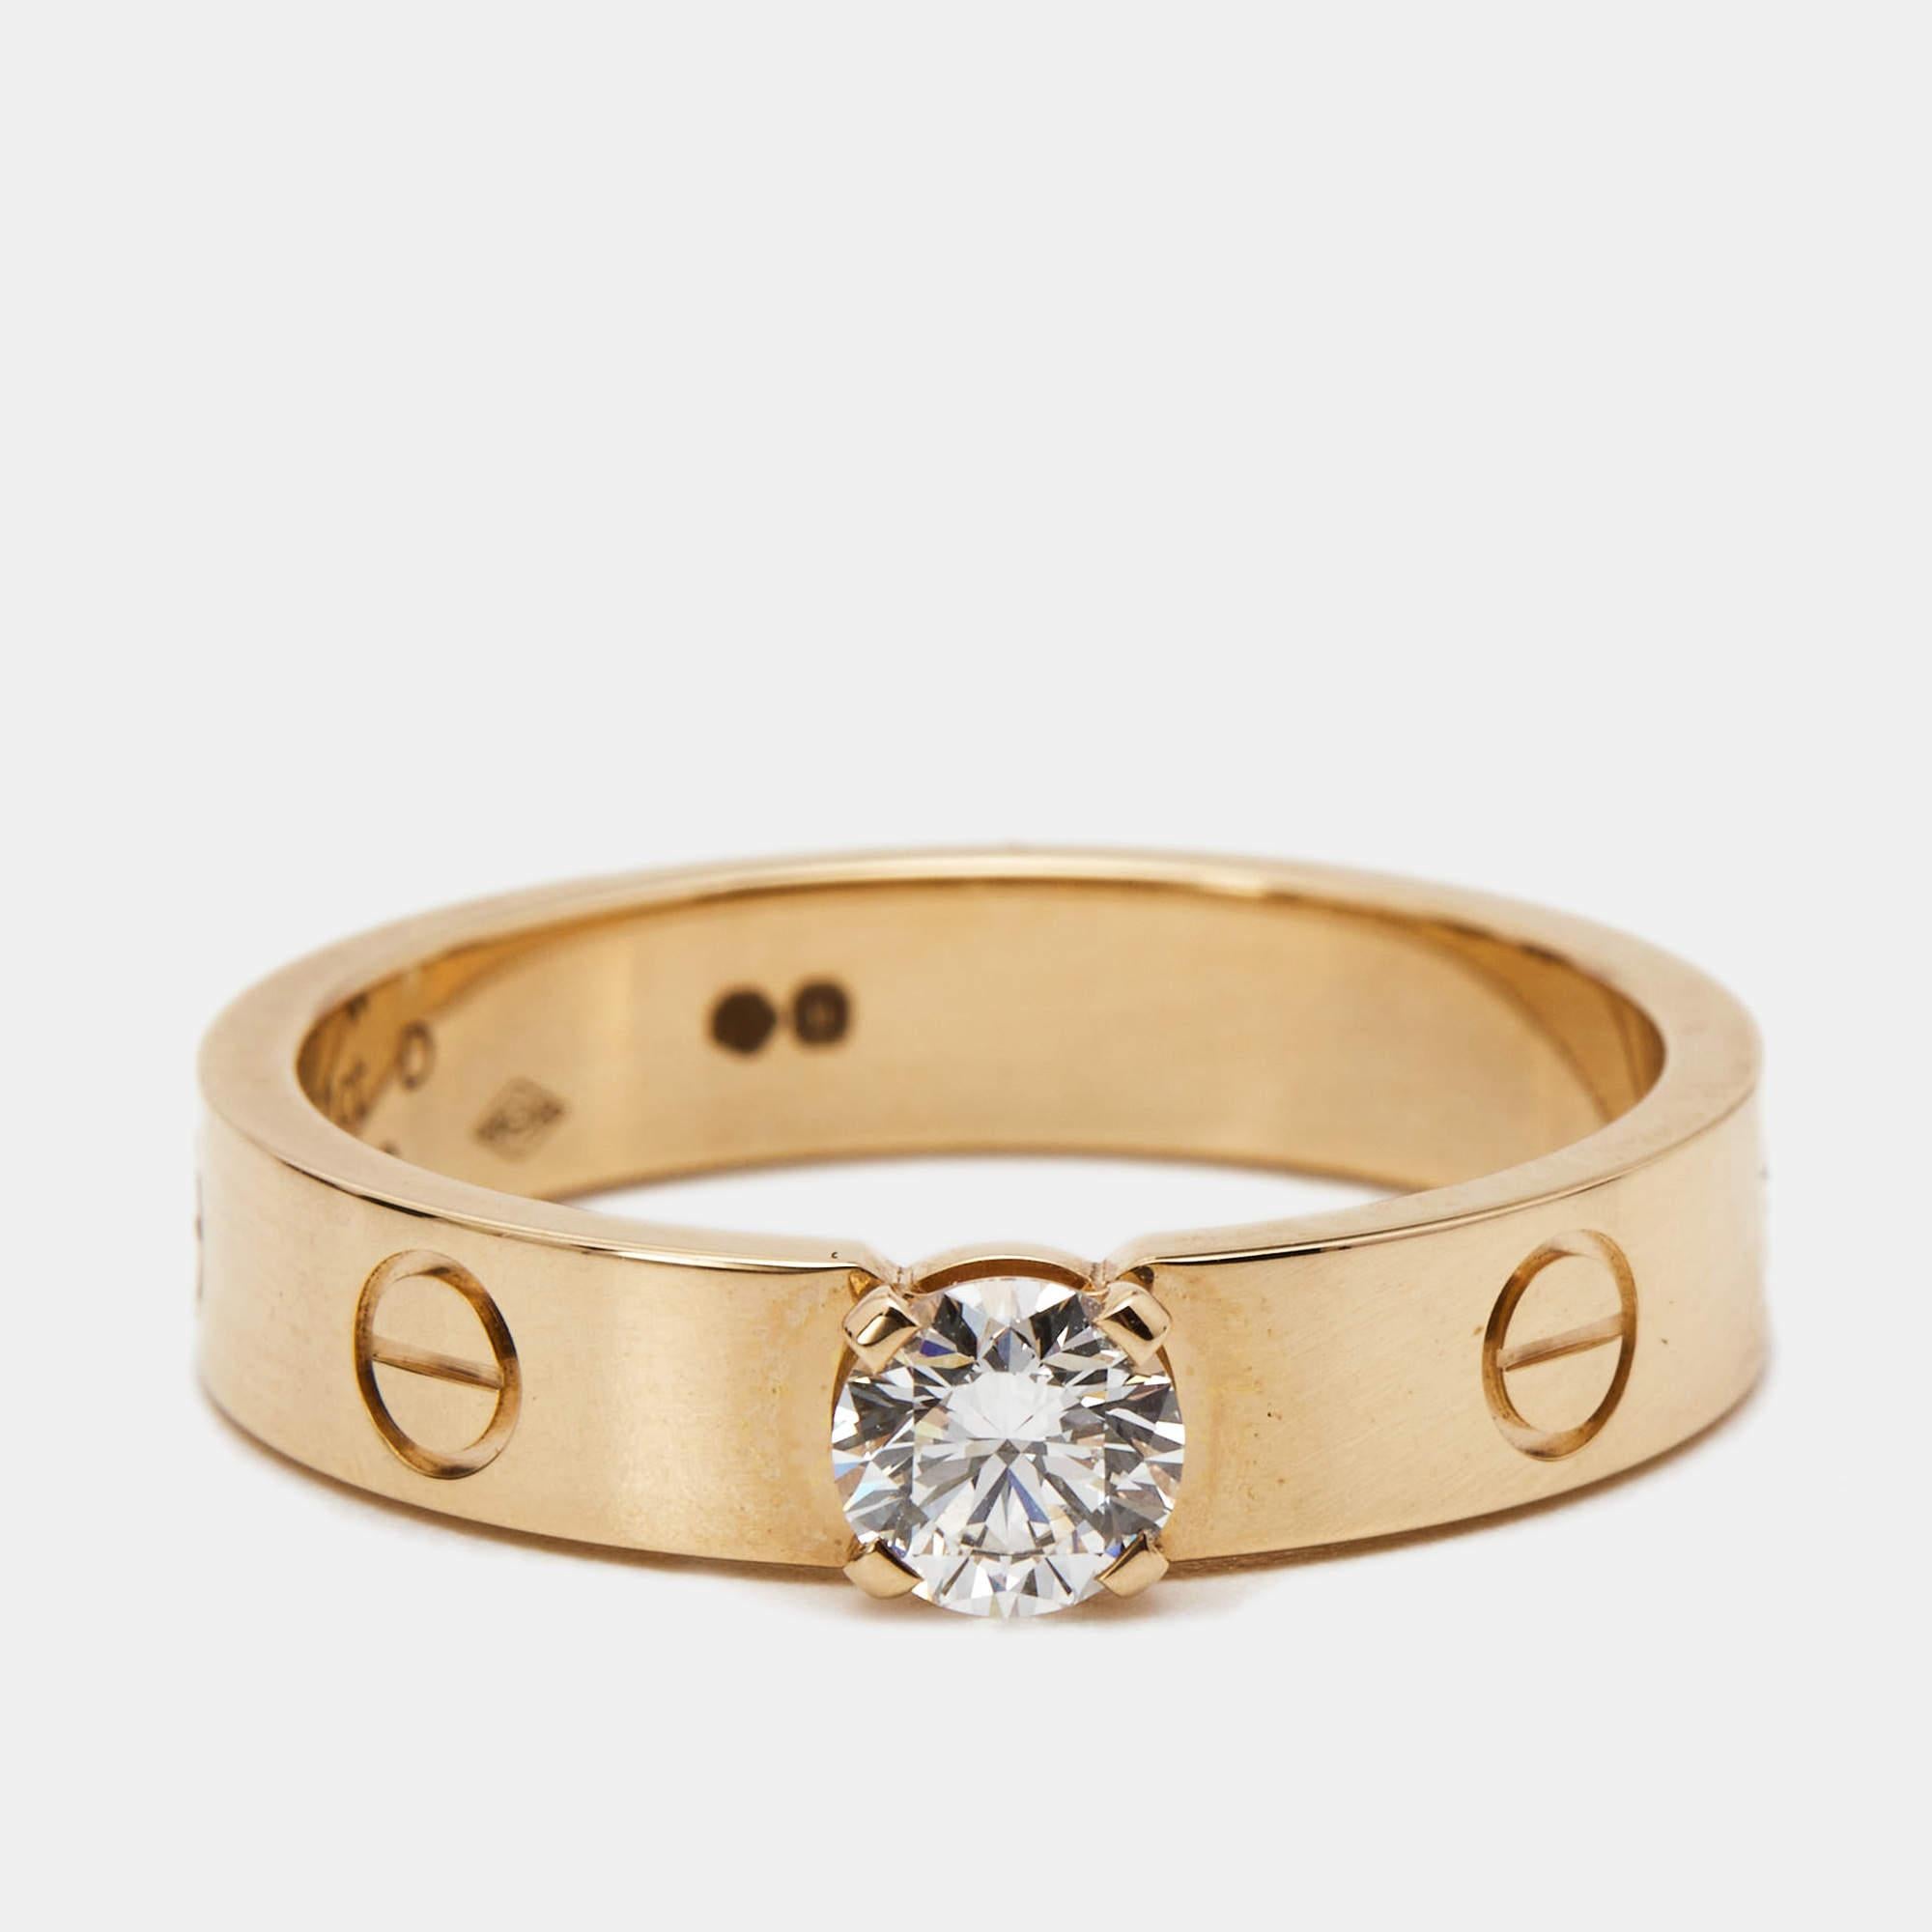 The Cartier Love ring is an exquisite and timeless piece of jewelry. Crafted from luxurious 18k rose gold, the ring features a dazzling solitaire diamond at its center, elegantly secured by the iconic Cartier Love motif. The combination of the 18k